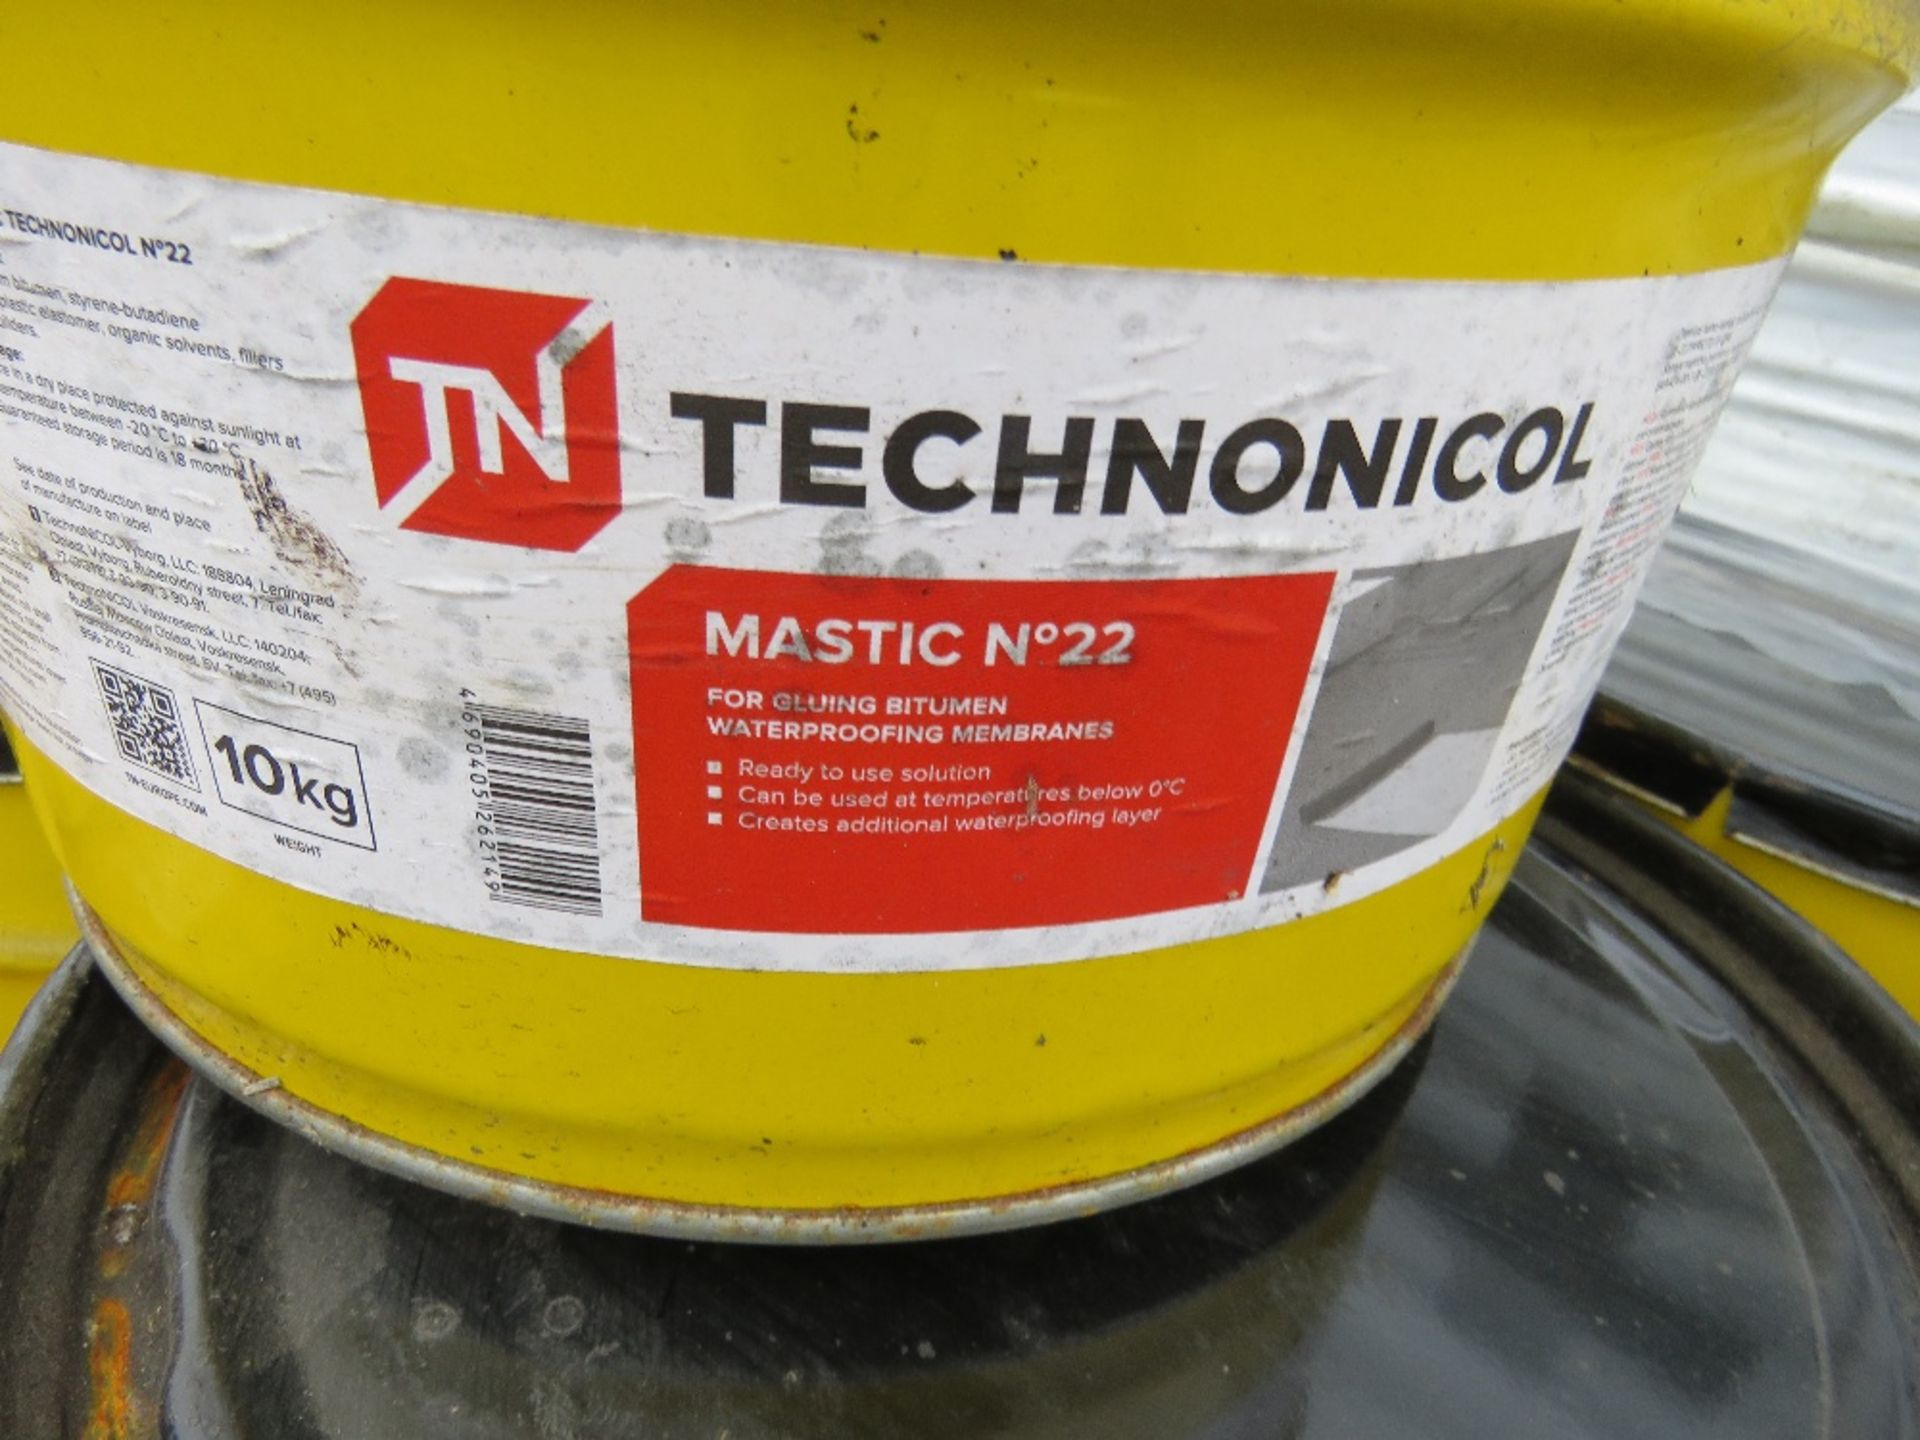 11NO TINS OF TECHNONICOL MASTIC 22 ROOFING COMPOUND. - Image 3 of 3